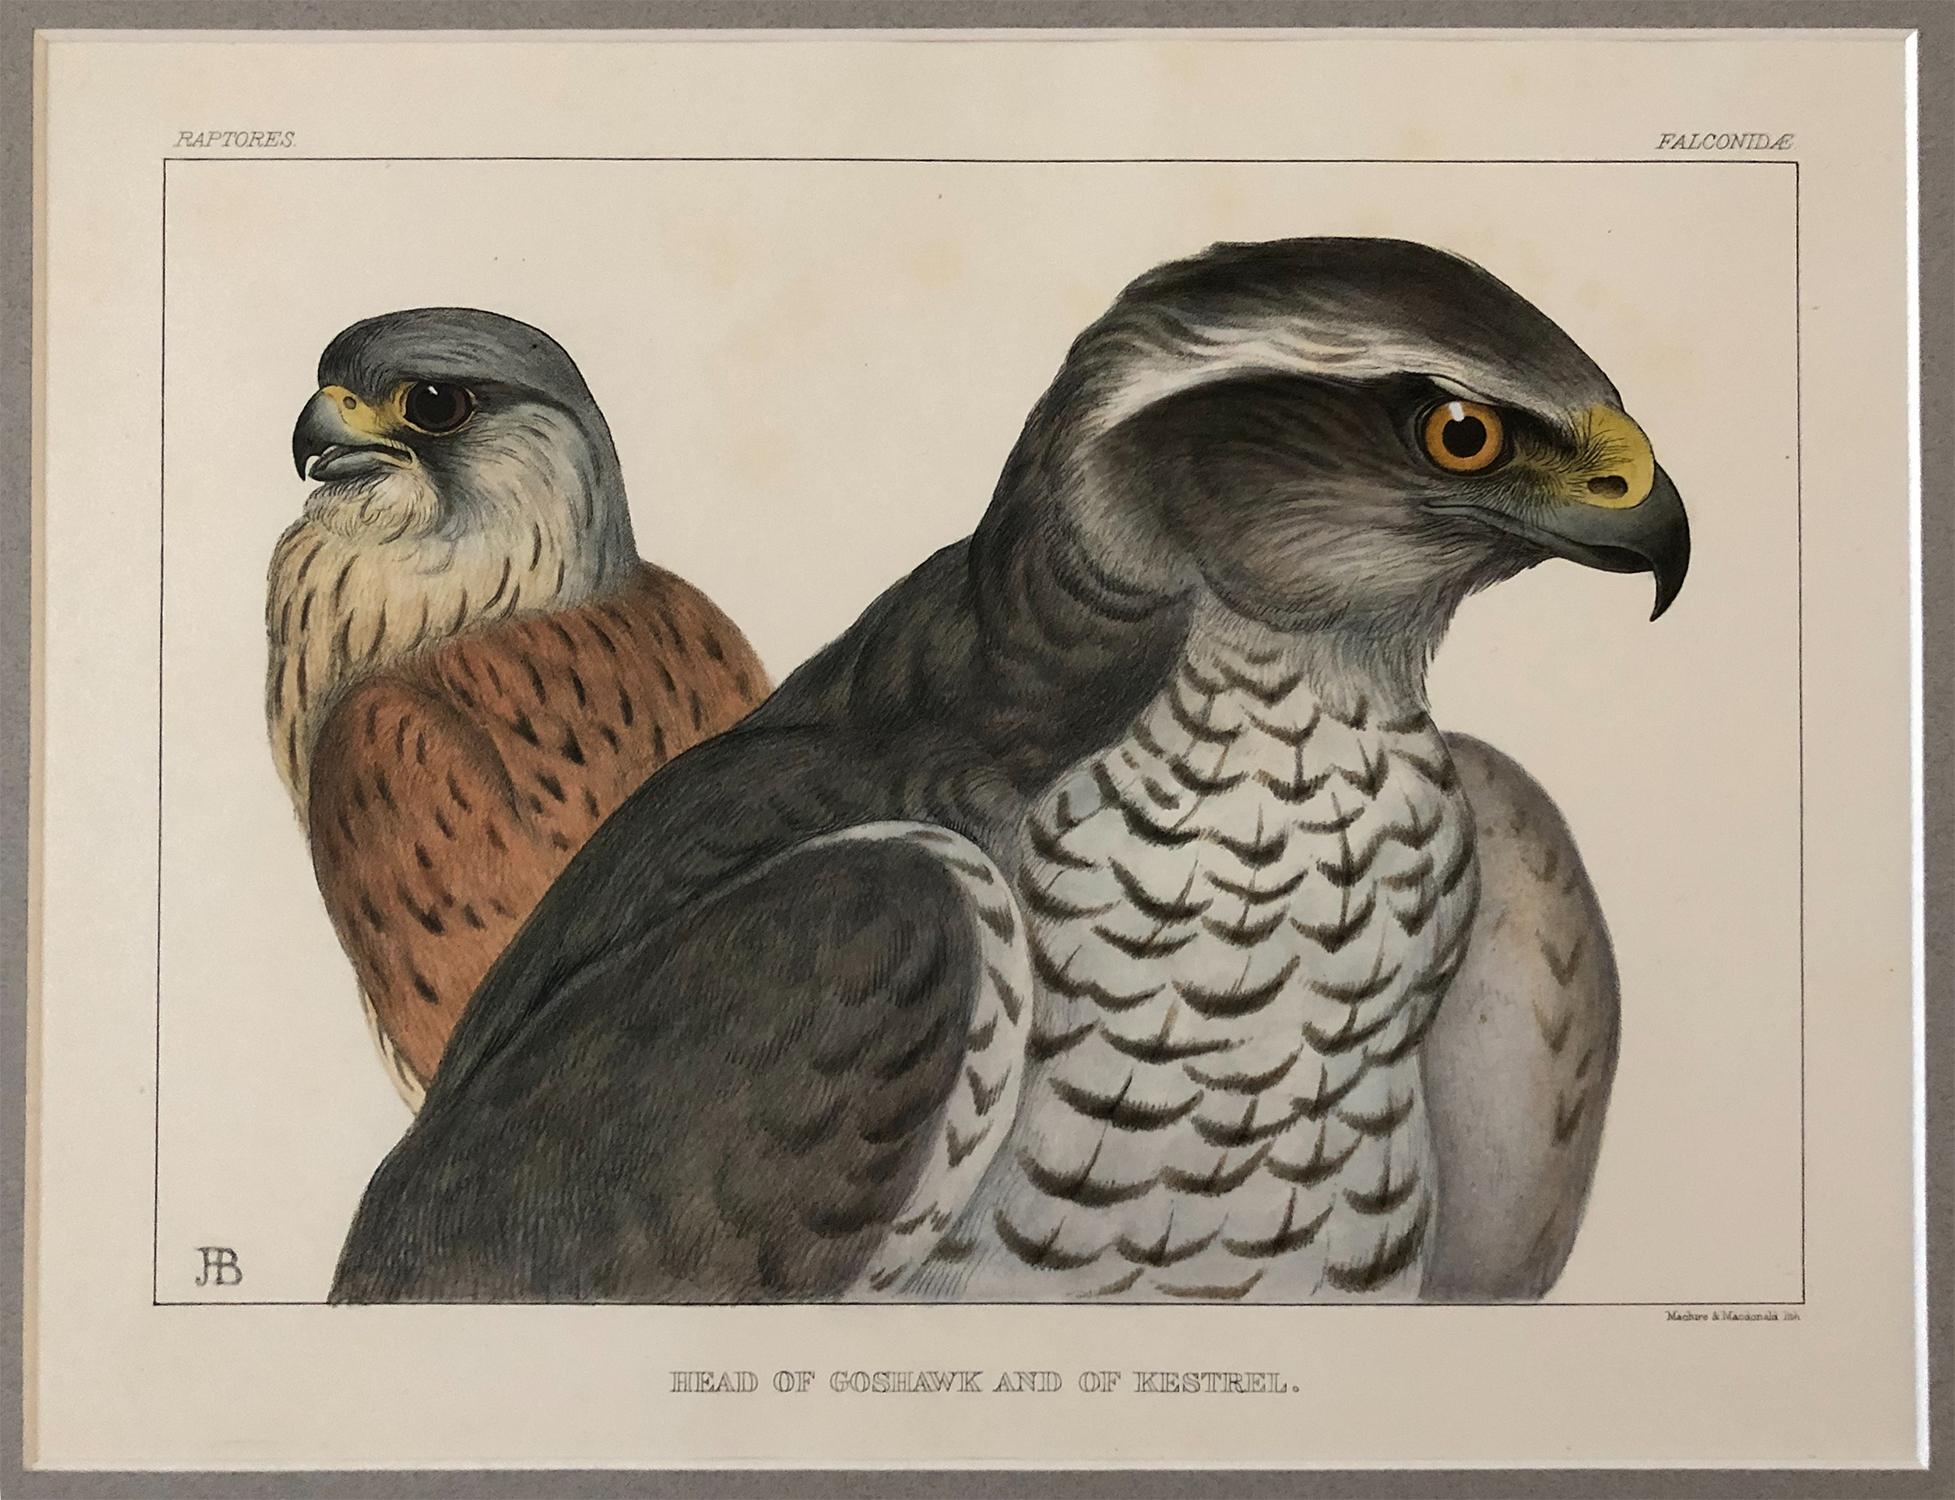 A rare set of 4 lithographs from “Birds Drawn from Nature” by Jemima Blackburn, published in Edinburgh in 1862.
Jemima Blackburn (1823-1909) was one of the most popular and talented ornithological illustrators of the Victorian era. By her early